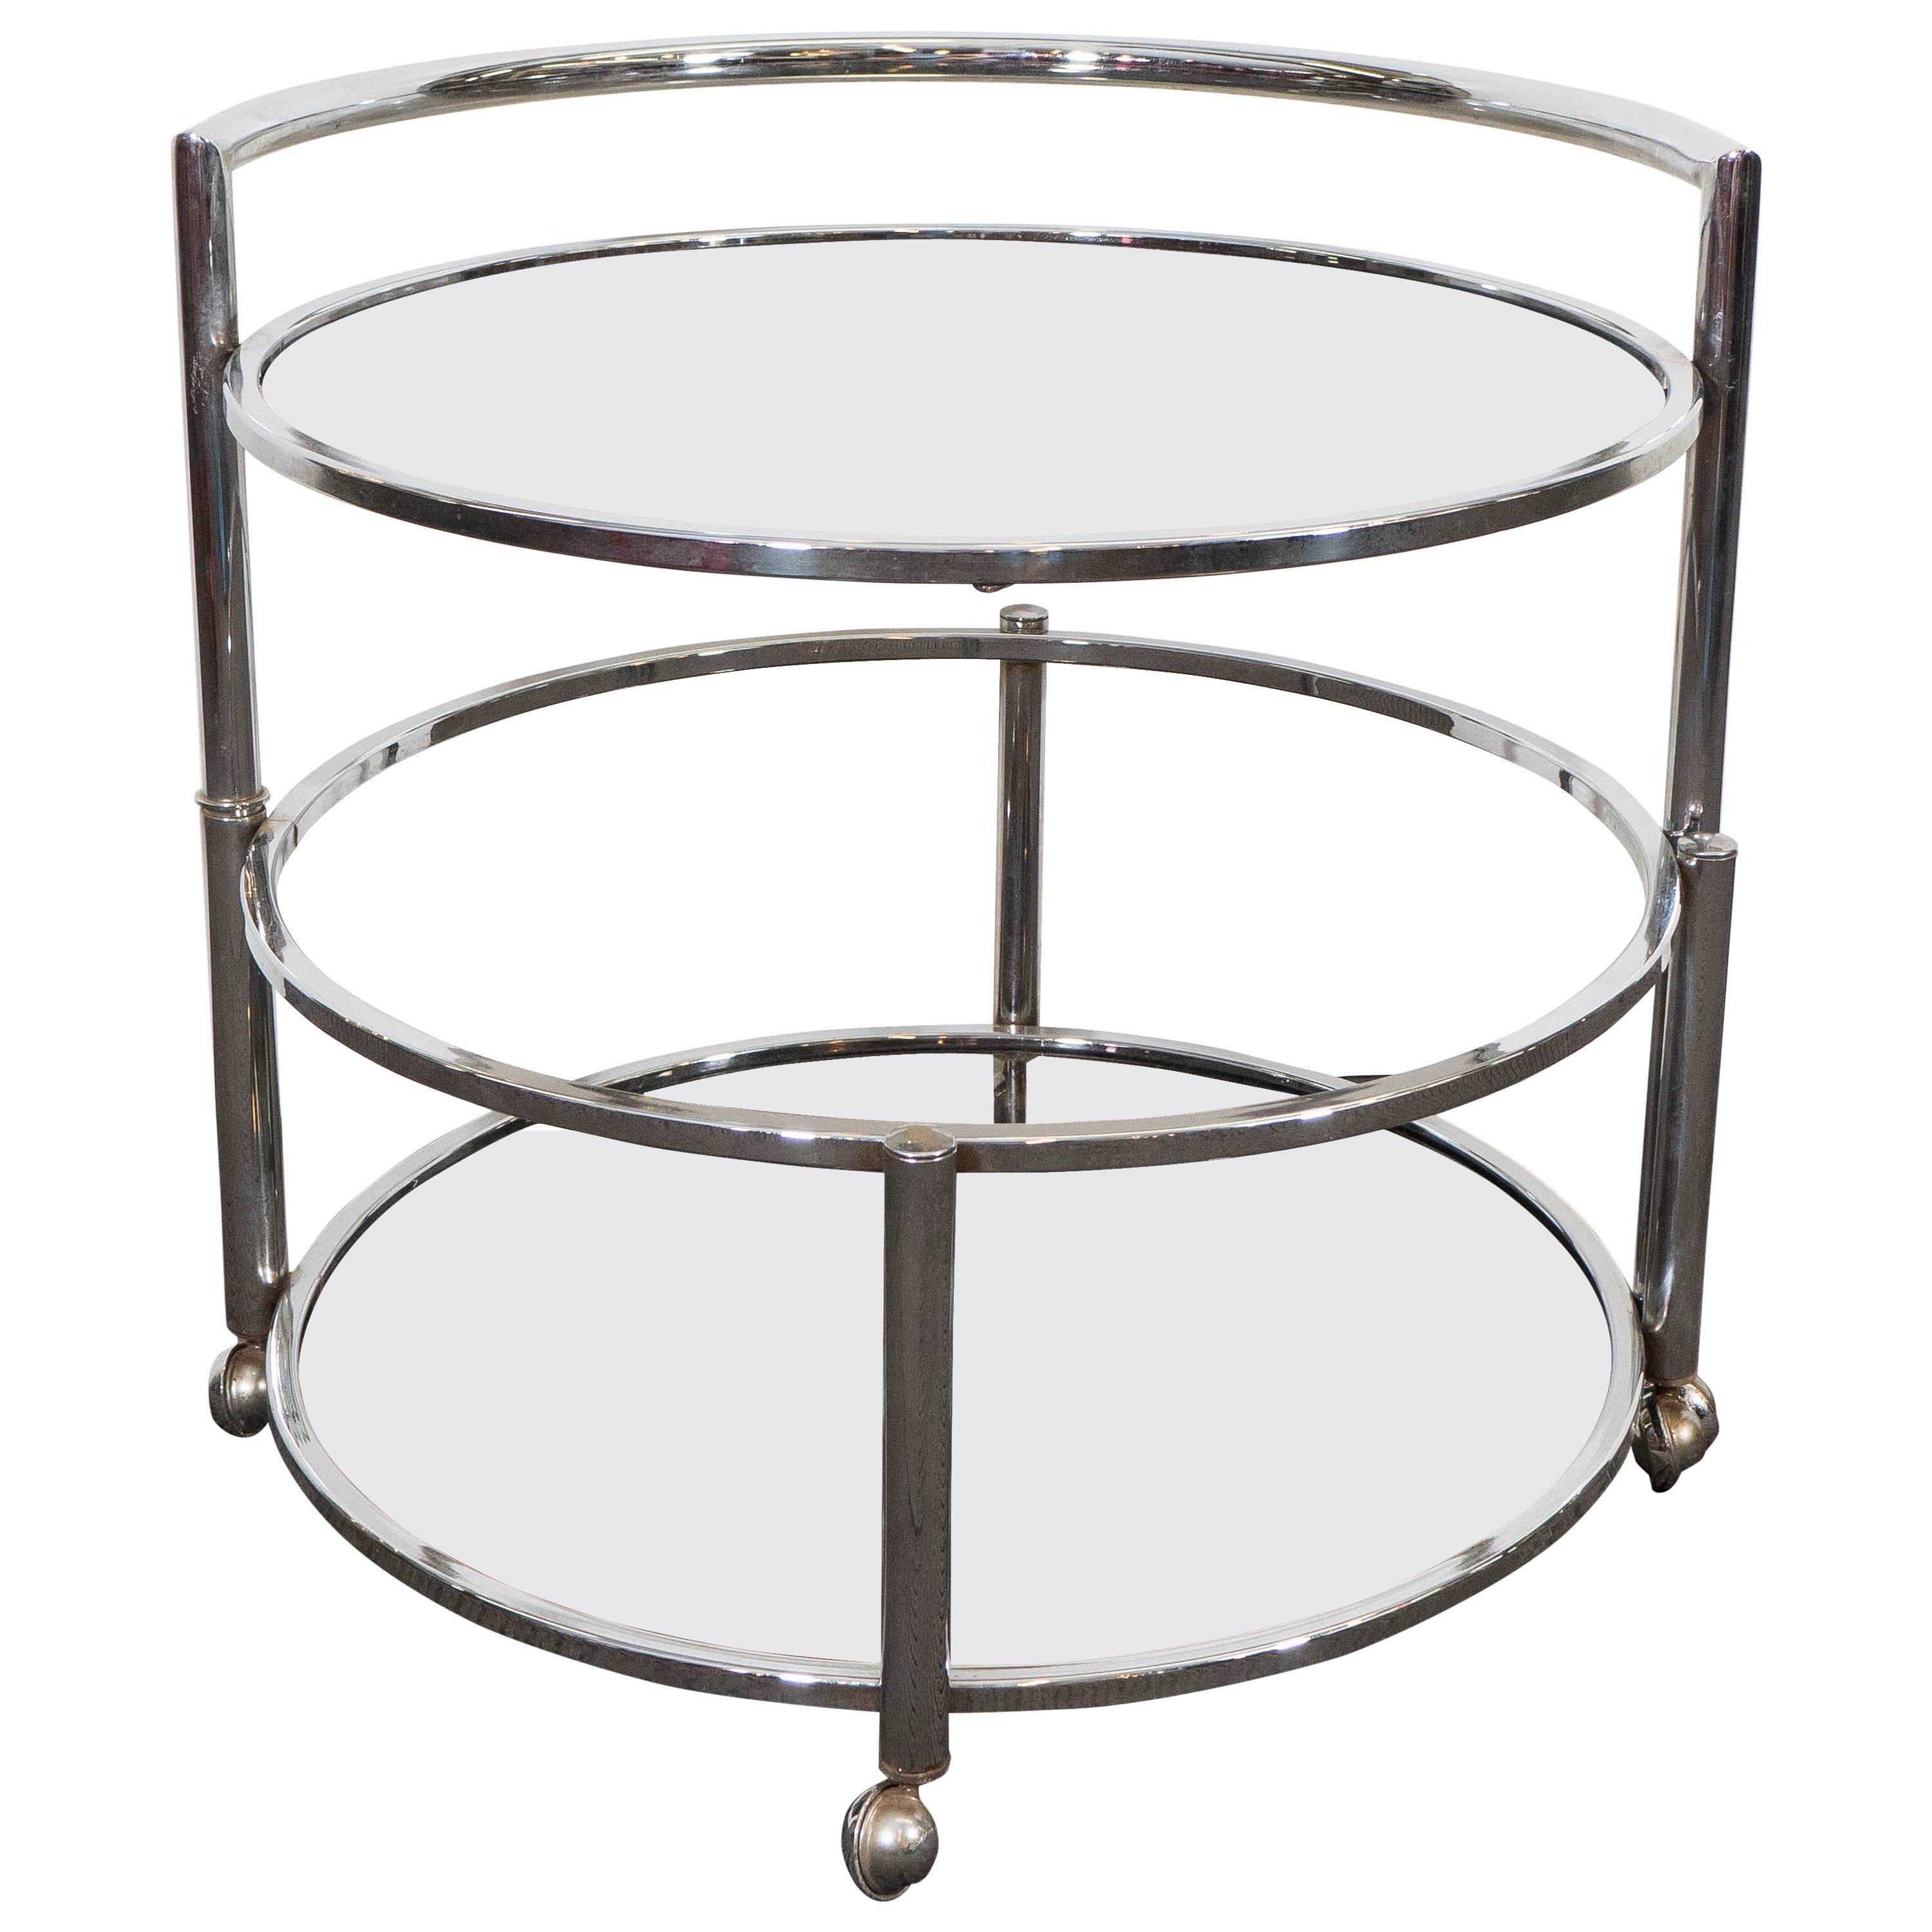 Midcentury Adjustable Round Occasional Table in Chrome & Smoked Glass on Casters